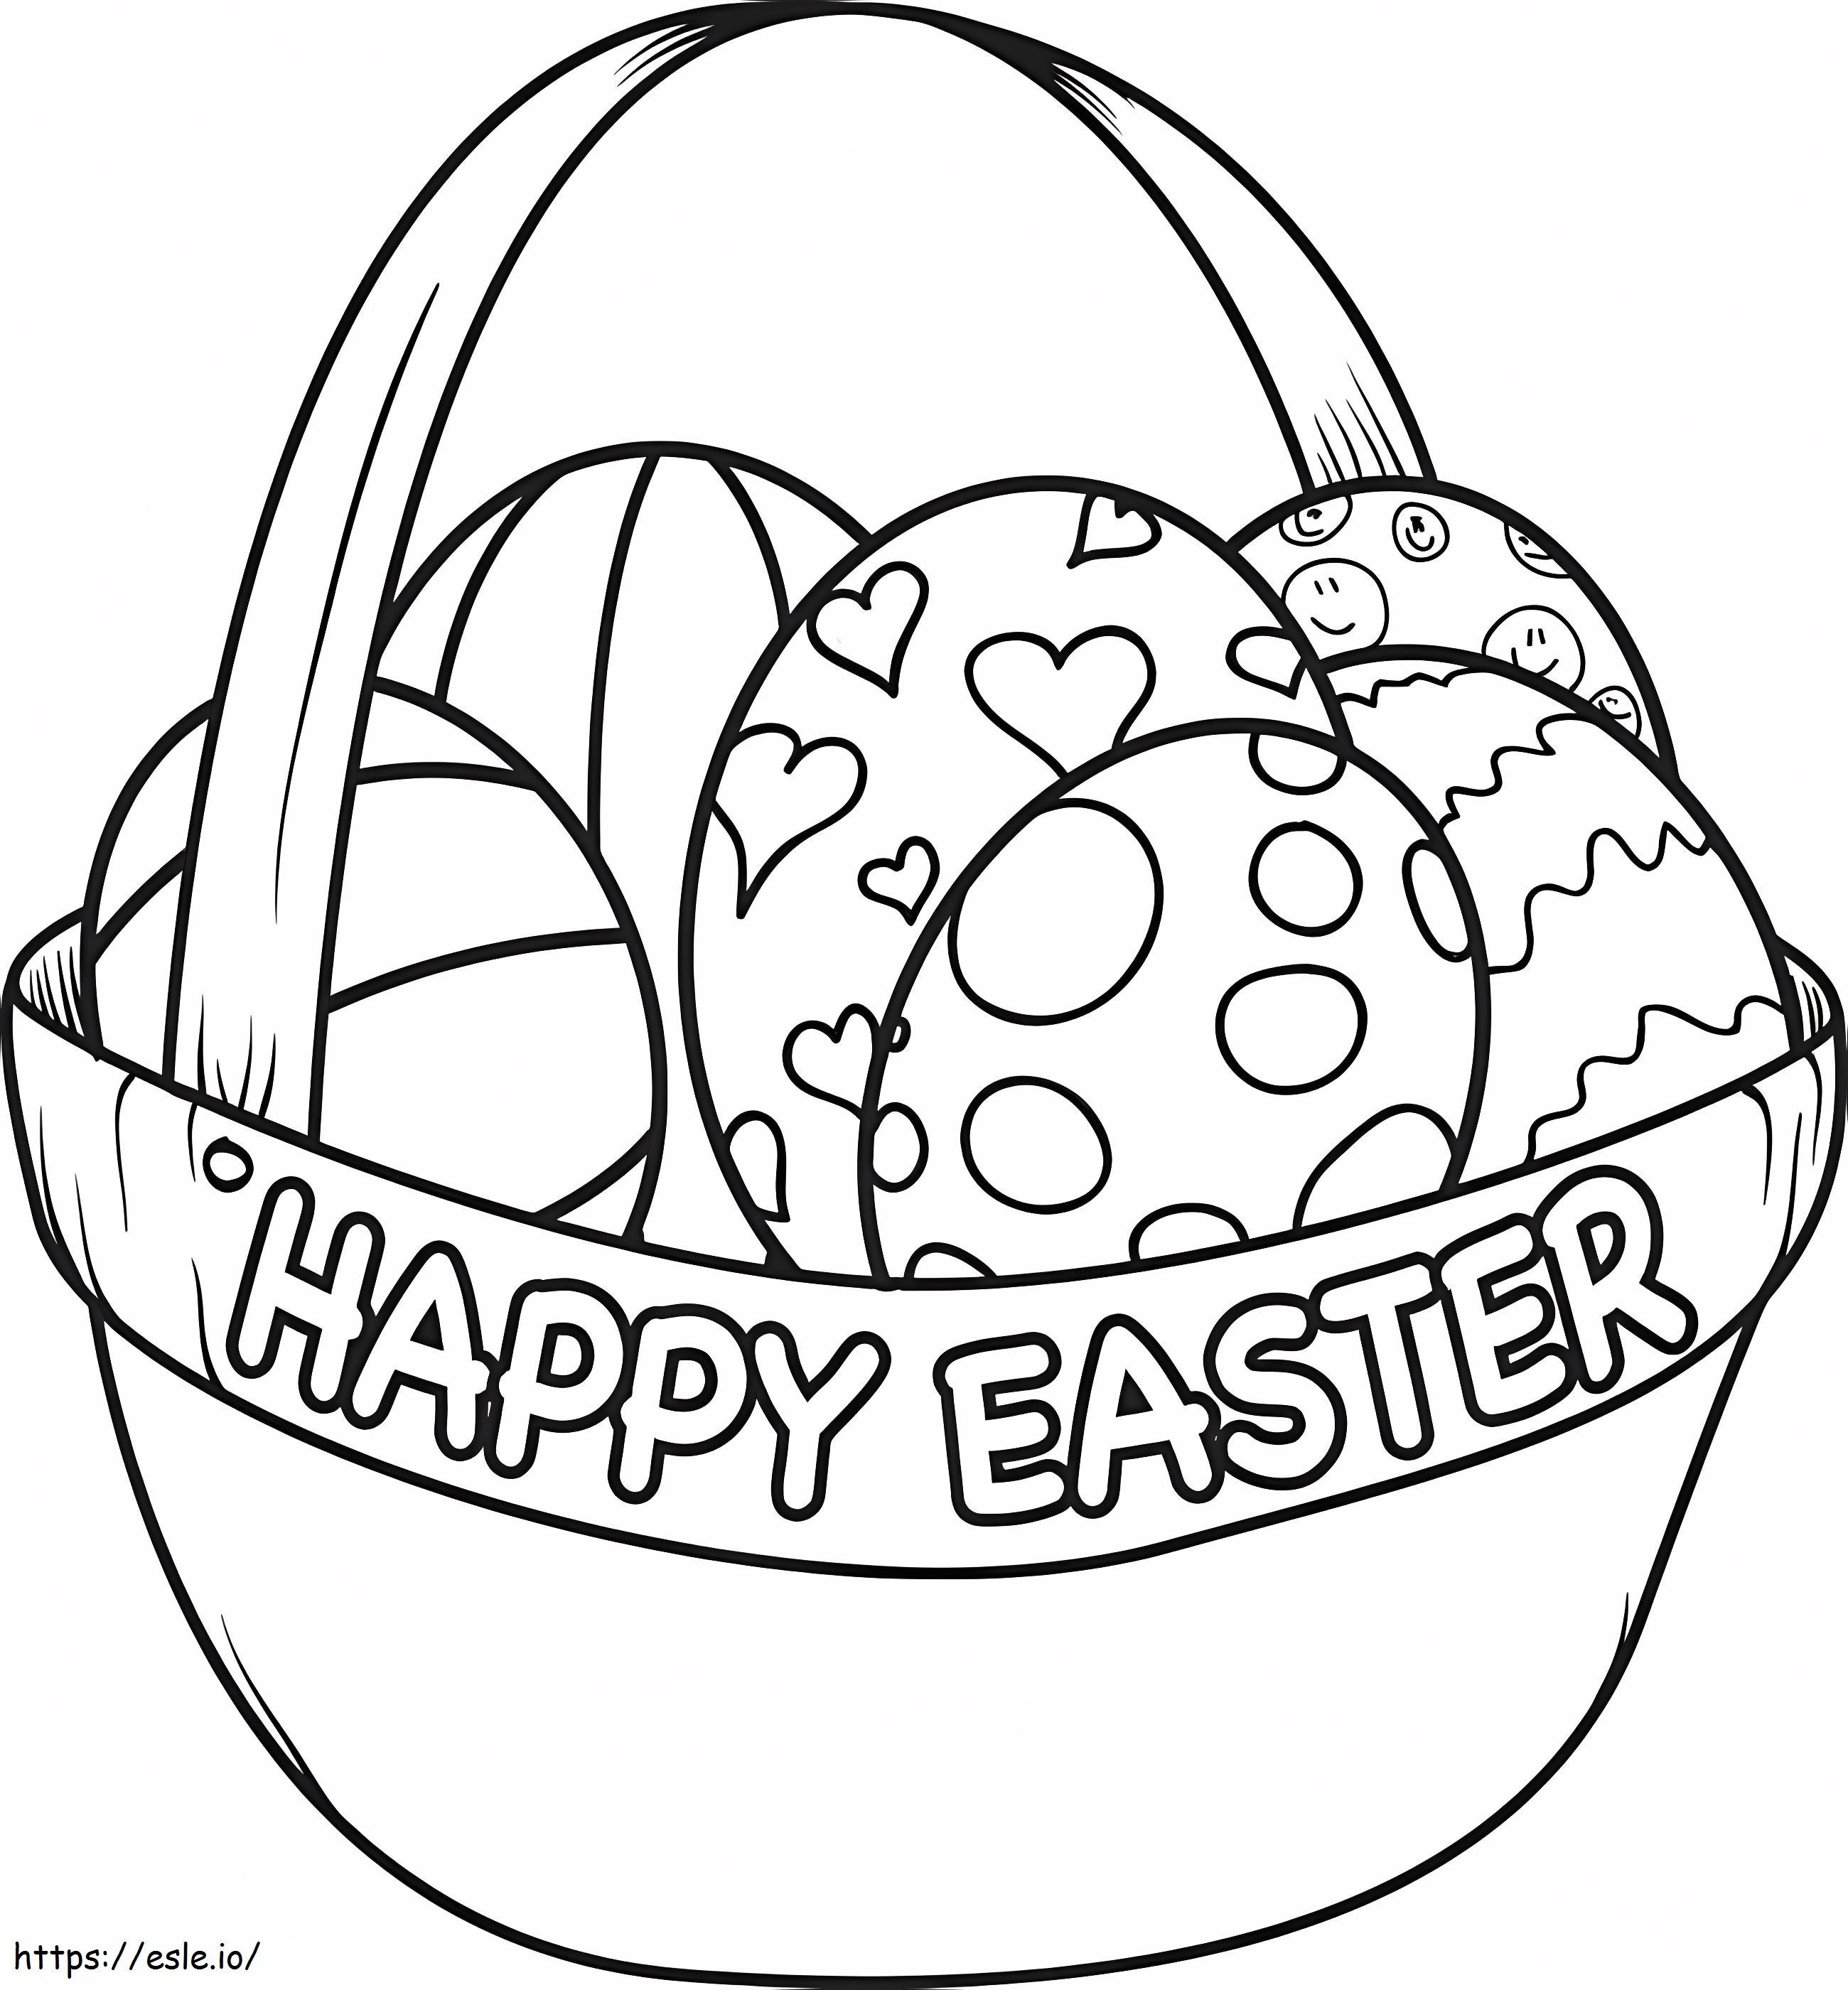 Happy Easter Eggs Basket coloring page